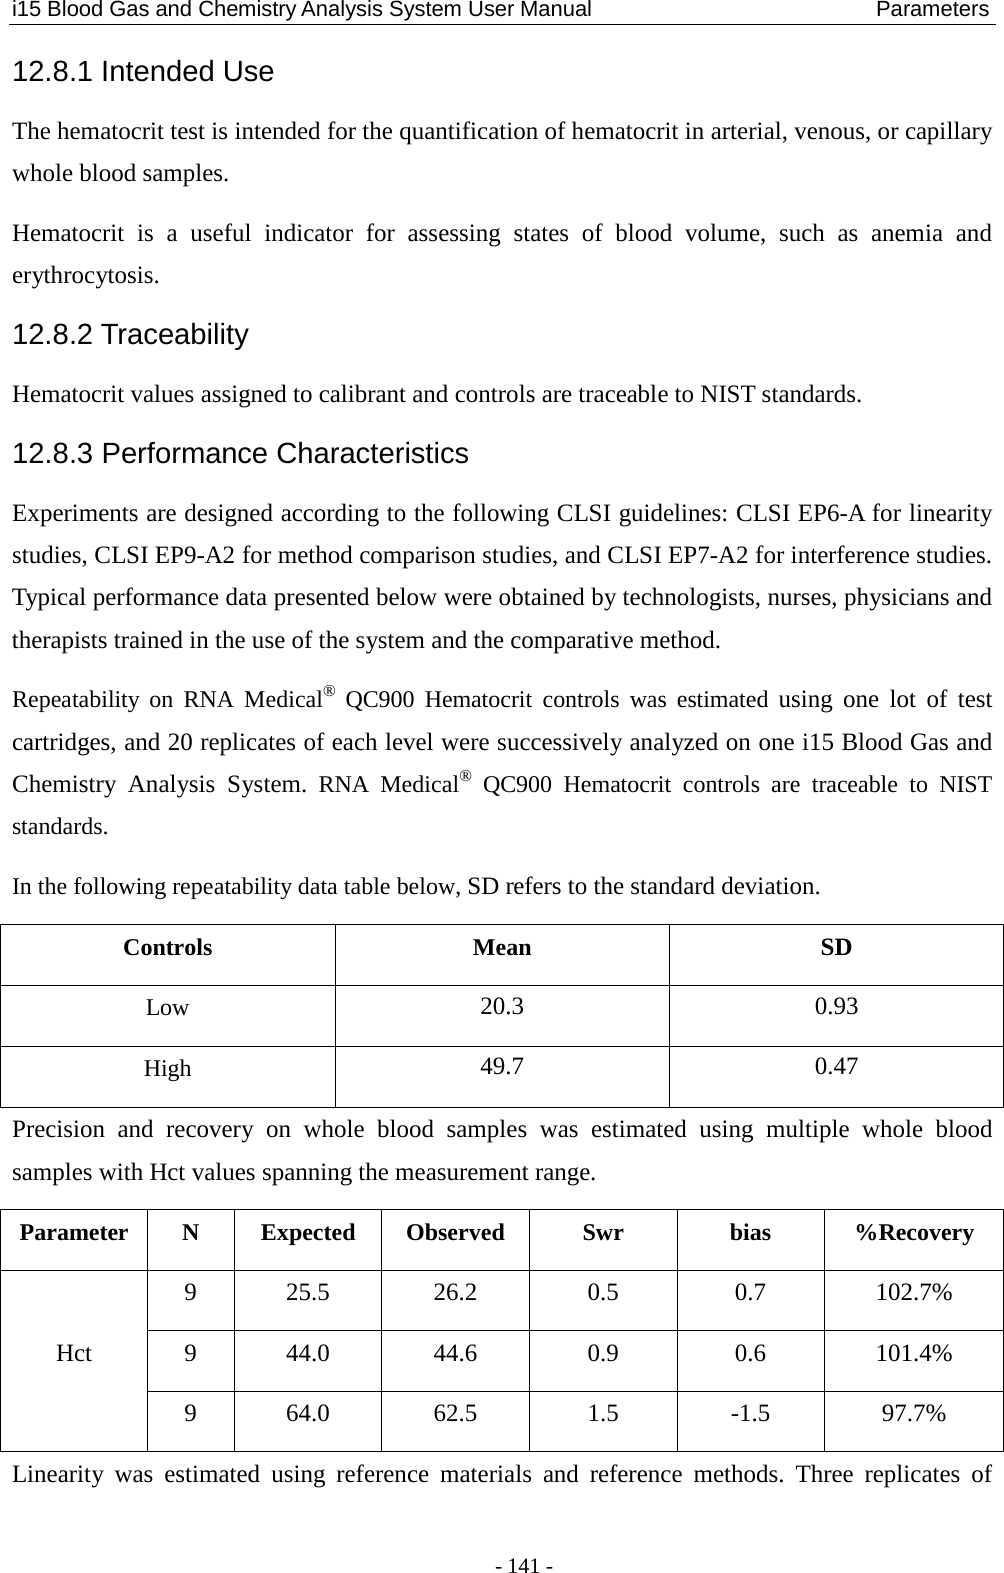 i15 Blood Gas and Chemistry Analysis System User Manual                            Parameters - 141 - 12.8.1 Intended Use The hematocrit test is intended for the quantification of hematocrit in arterial, venous, or capillary whole blood samples. Hematocrit is a useful indicator for assessing states of blood  volume, such as anemia and erythrocytosis. 12.8.2 Traceability Hematocrit values assigned to calibrant and controls are traceable to NIST standards. 12.8.3 Performance Characteristics Experiments are designed according to the following CLSI guidelines: CLSI EP6-A for linearity studies, CLSI EP9-A2 for method comparison studies, and CLSI EP7-A2 for interference studies. Typical performance data presented below were obtained by technologists, nurses, physicians and therapists trained in the use of the system and the comparative method. Repeatability on RNA Medical® QC900  Hematocrit  controls  was estimated using one lot  of test cartridges, and 20 replicates of each level were successively analyzed on one i15 Blood Gas and Chemistry Analysis System. RNA Medical® QC900  Hematocrit  controls  are traceable to NIST standards. In the following repeatability data table below, SD refers to the standard deviation. Controls  Mean SD Low 20.3  0.93 High 49.7  0.47 Precision and recovery on whole blood samples was estimated using multiple whole blood samples with Hct values spanning the measurement range. Parameter  N  Expected  Observed Swr bias %Recovery Hct 9  25.5  26.2  0.5  0.7  102.7% 9  44.0  44.6  0.9  0.6  101.4% 9  64.0  62.5  1.5  -1.5  97.7% Linearity was estimated using reference materials and reference methods. Three replicates of 